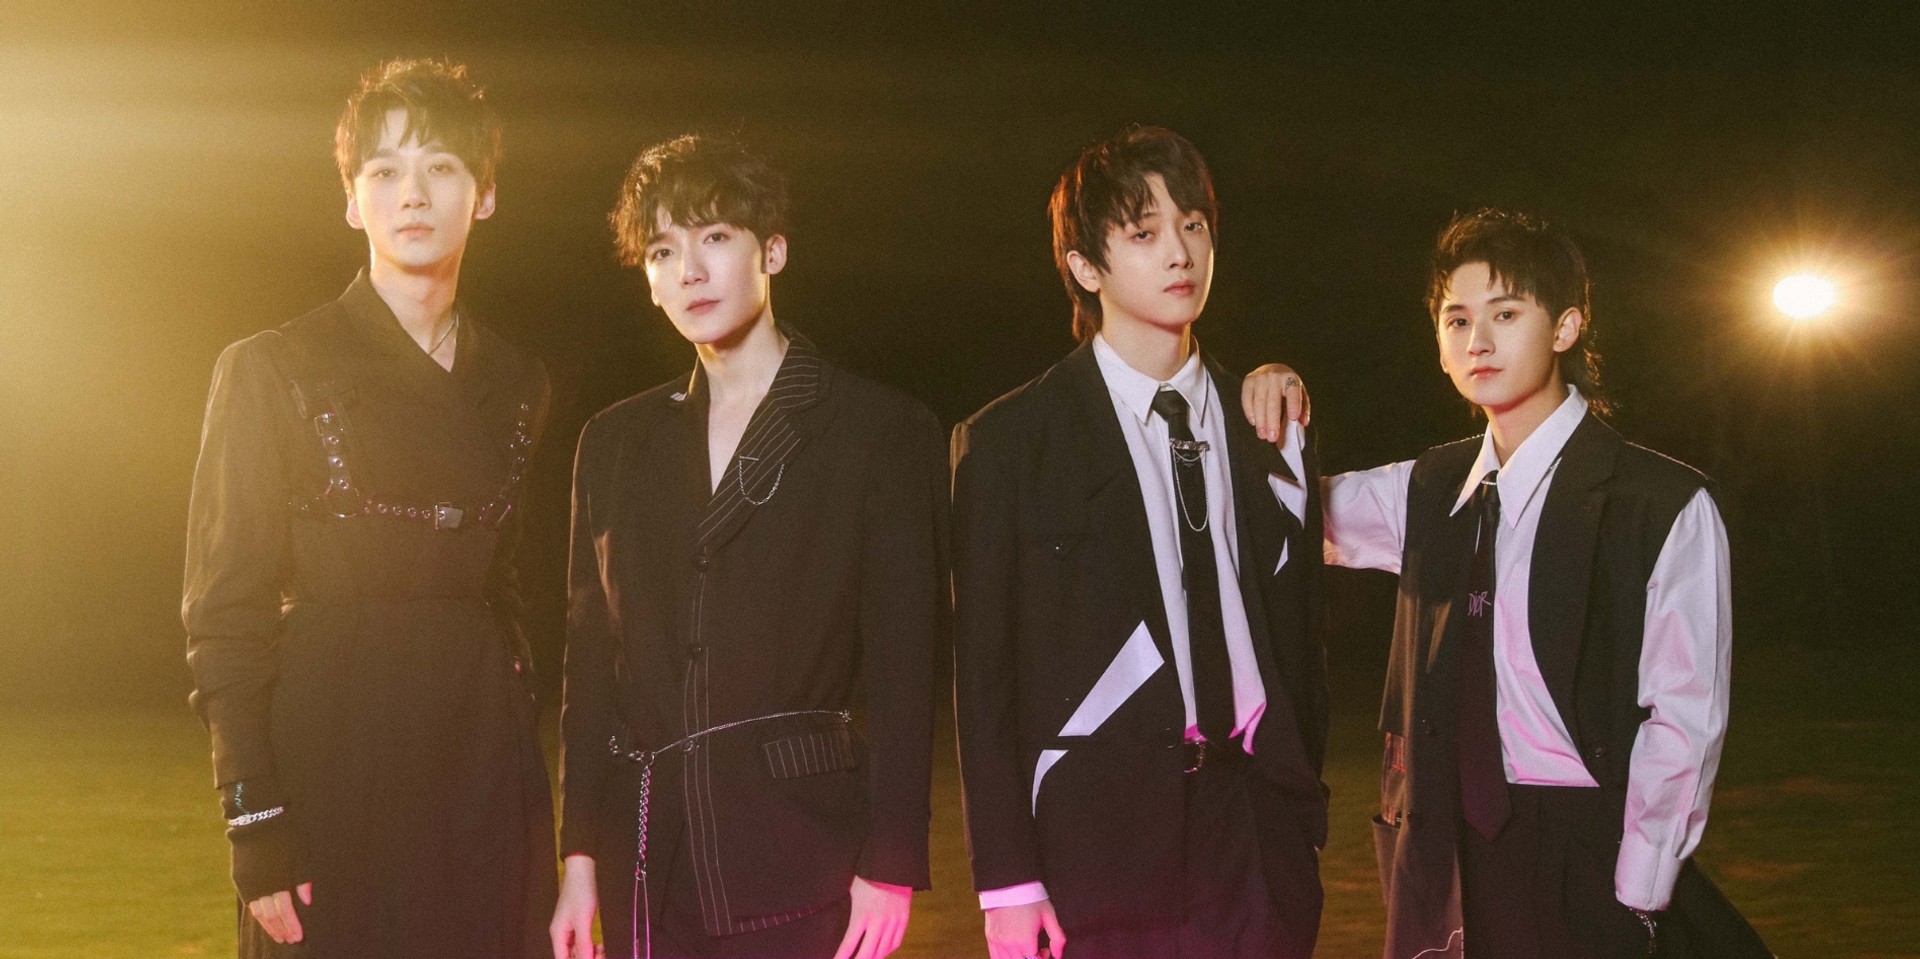 Chinese boy group T.U.B.S announce fanclub name, colour, and physical album release